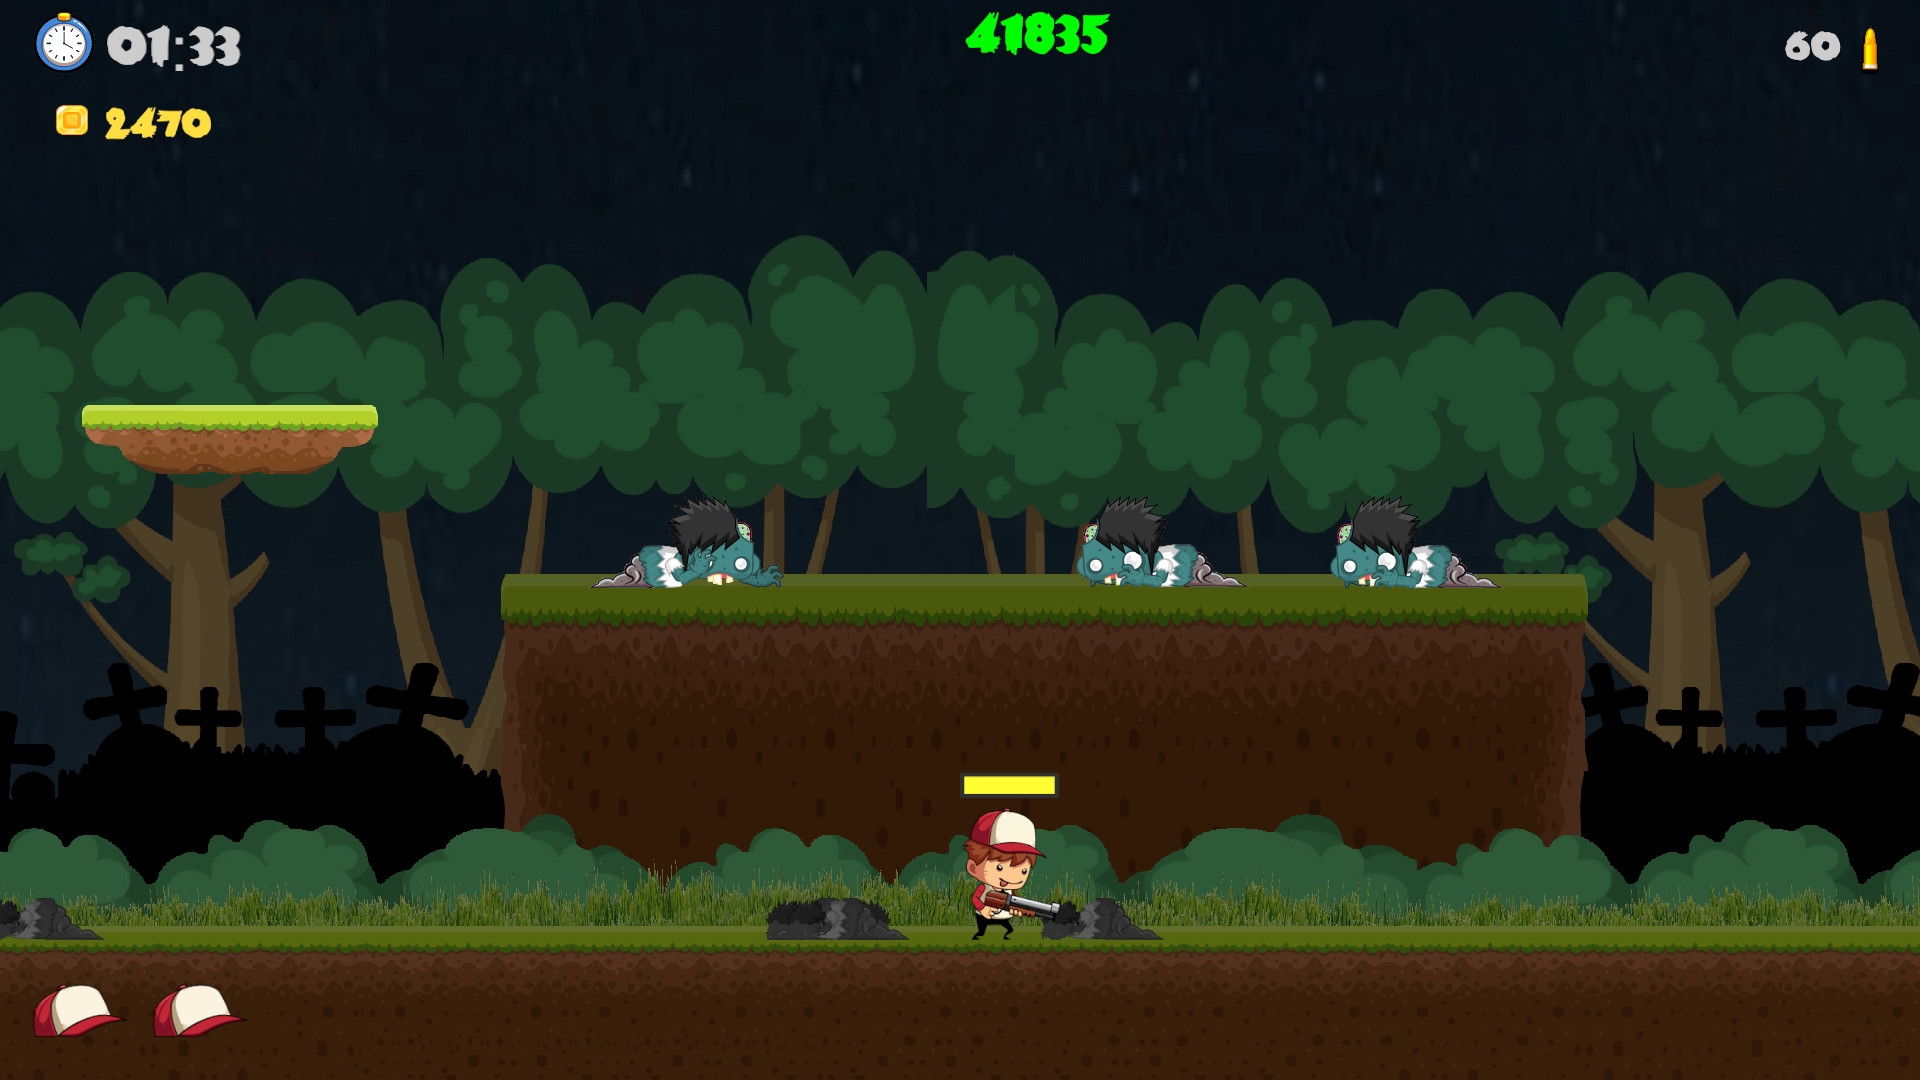 Red Cap Zombie Hunter Free Download